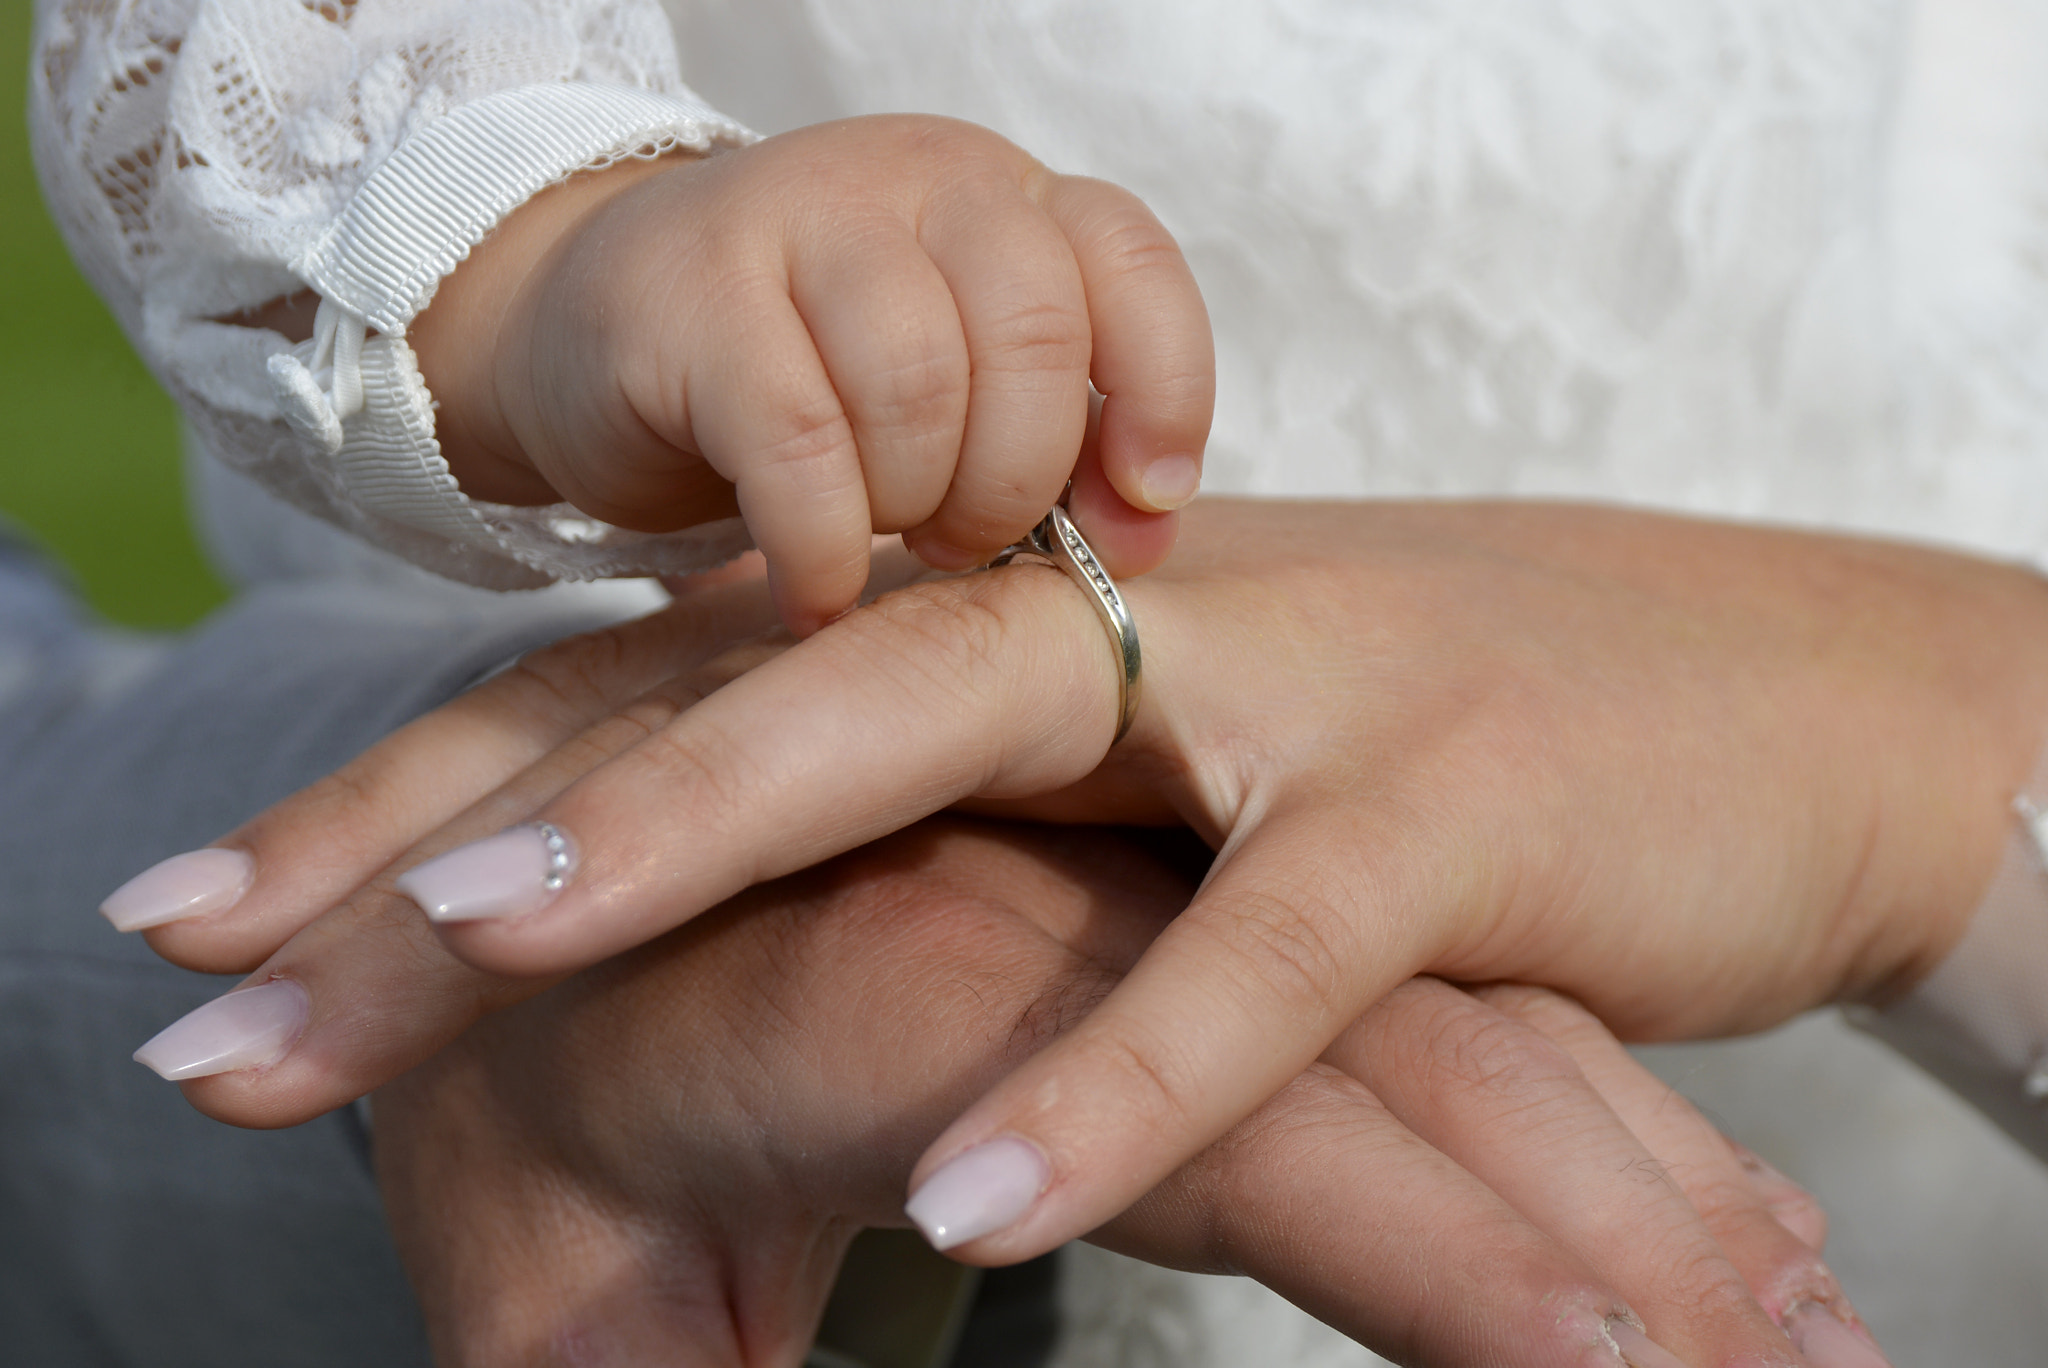 Nikon D600 sample photo. The three musketeers... mother, father and daughter's hands photography